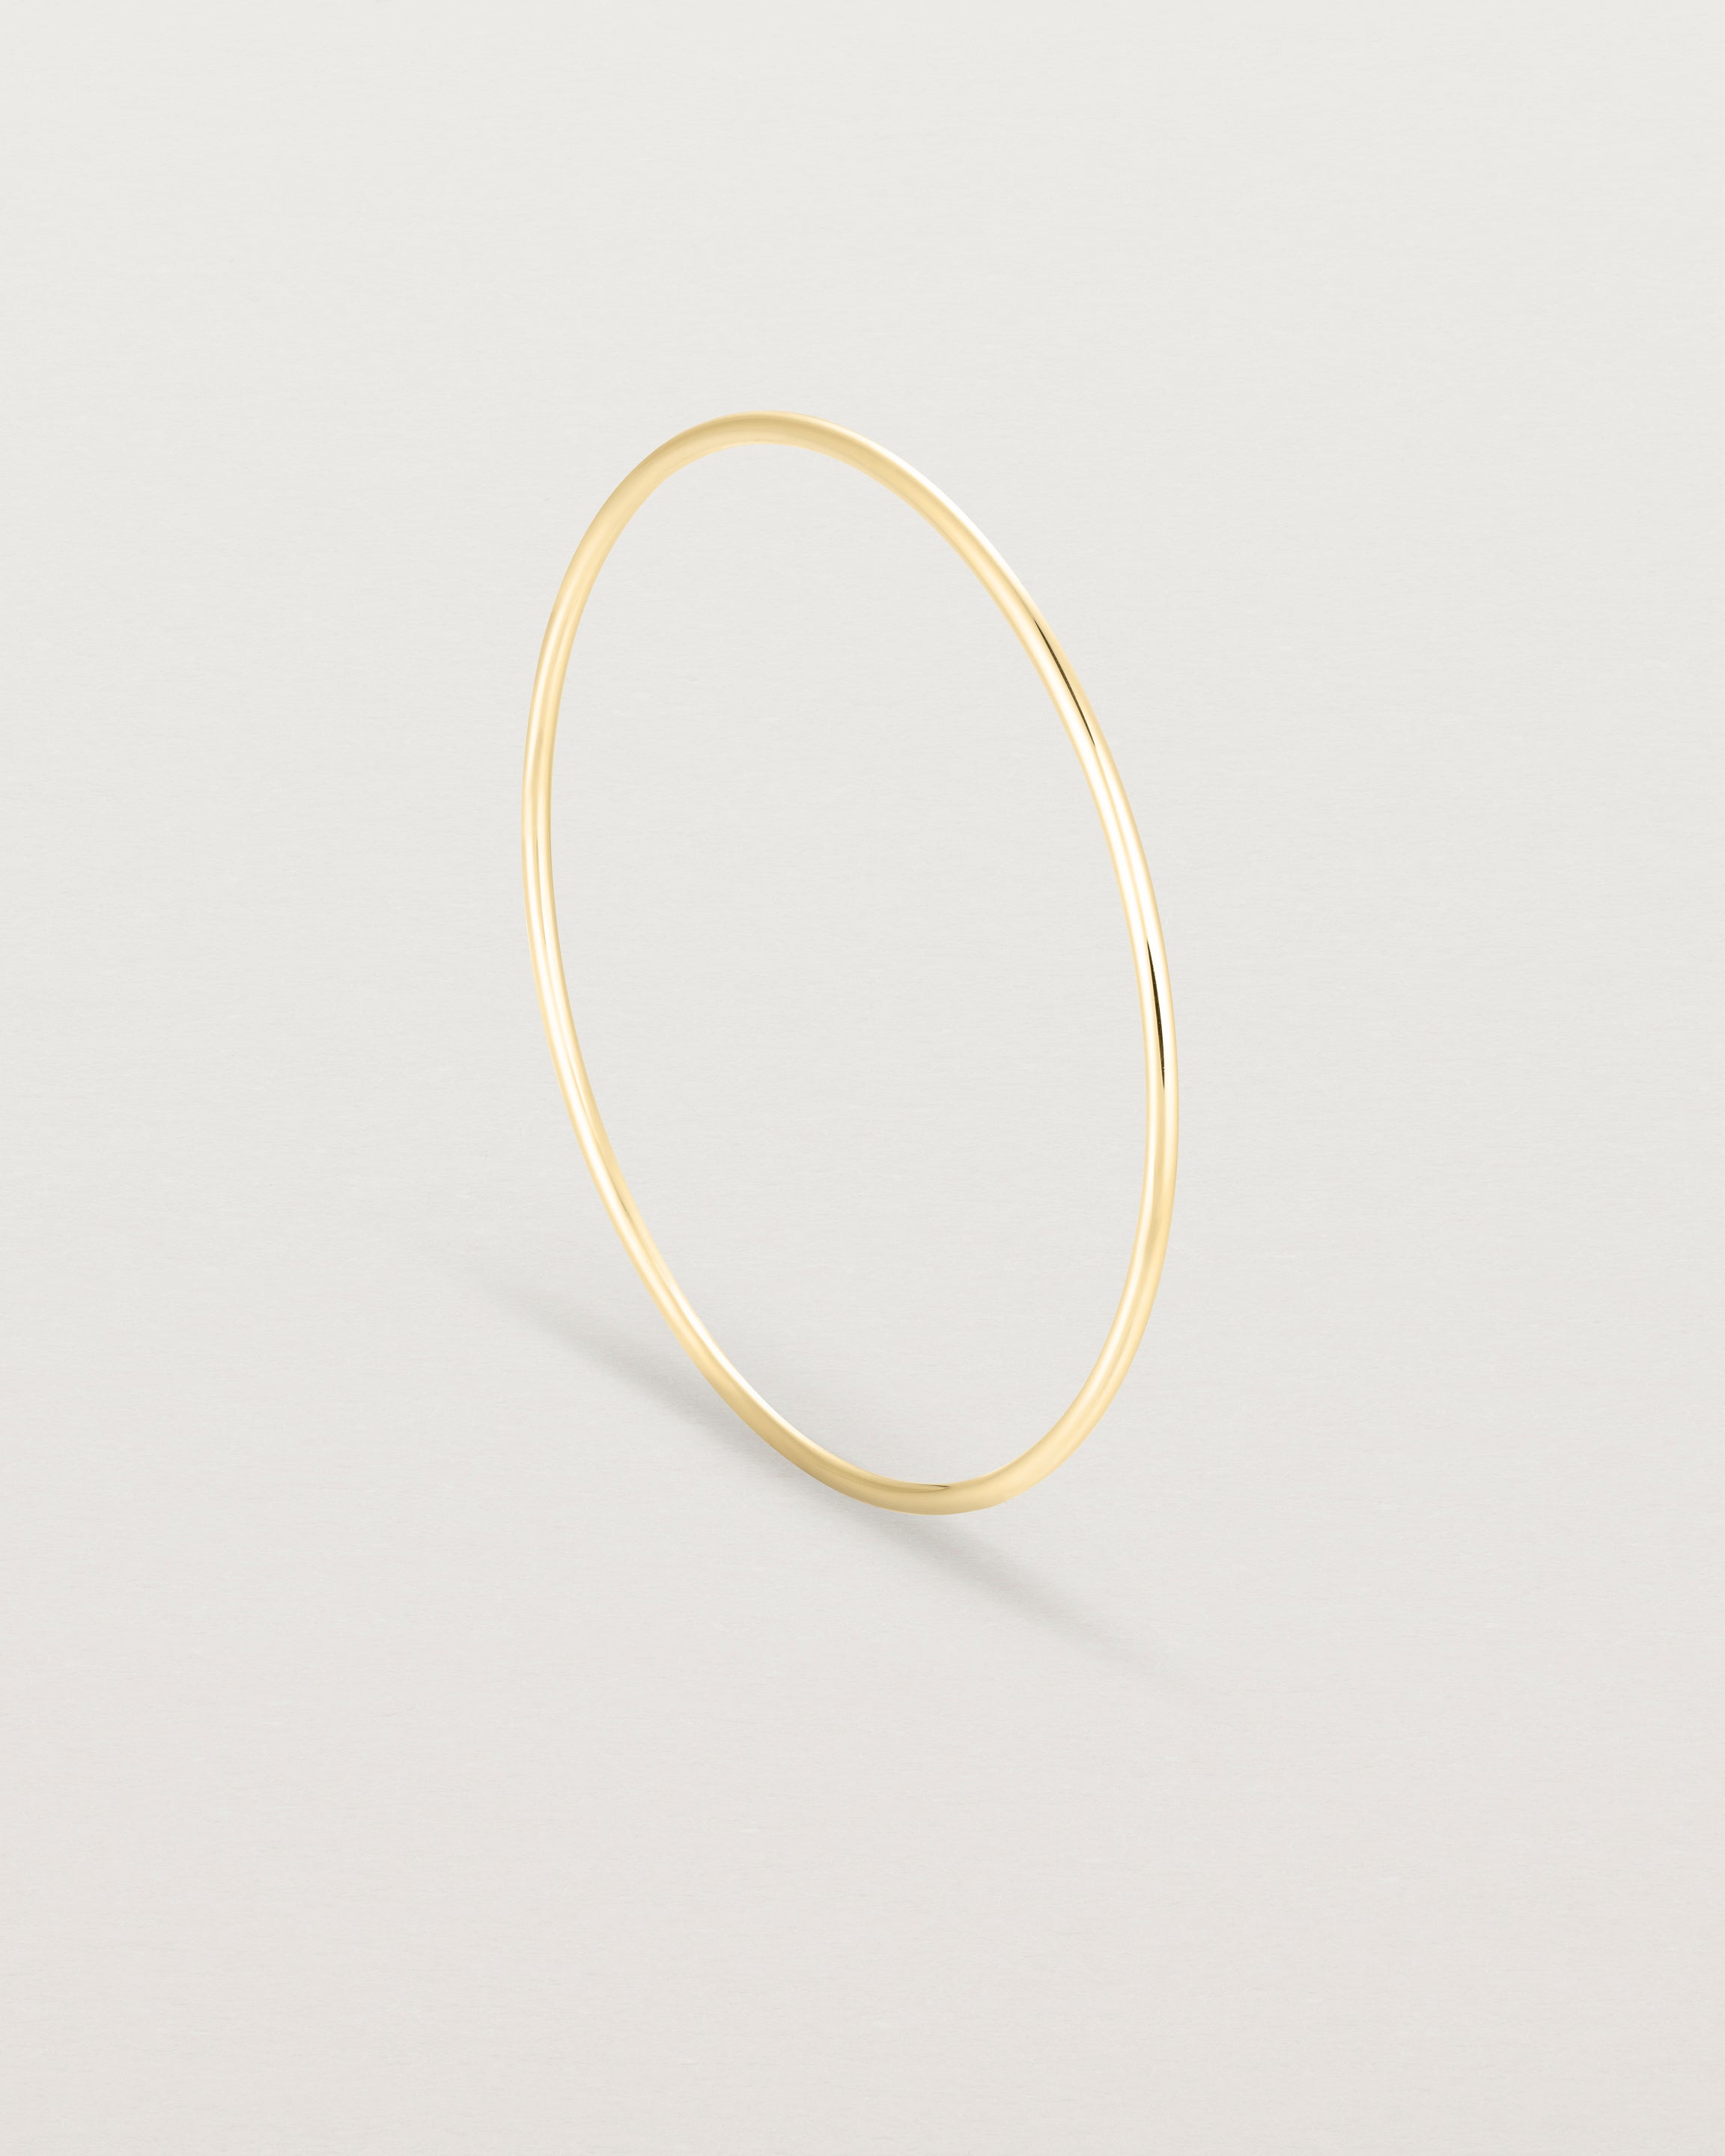 Standing view of the Oval Bangle in Yellow Gold.